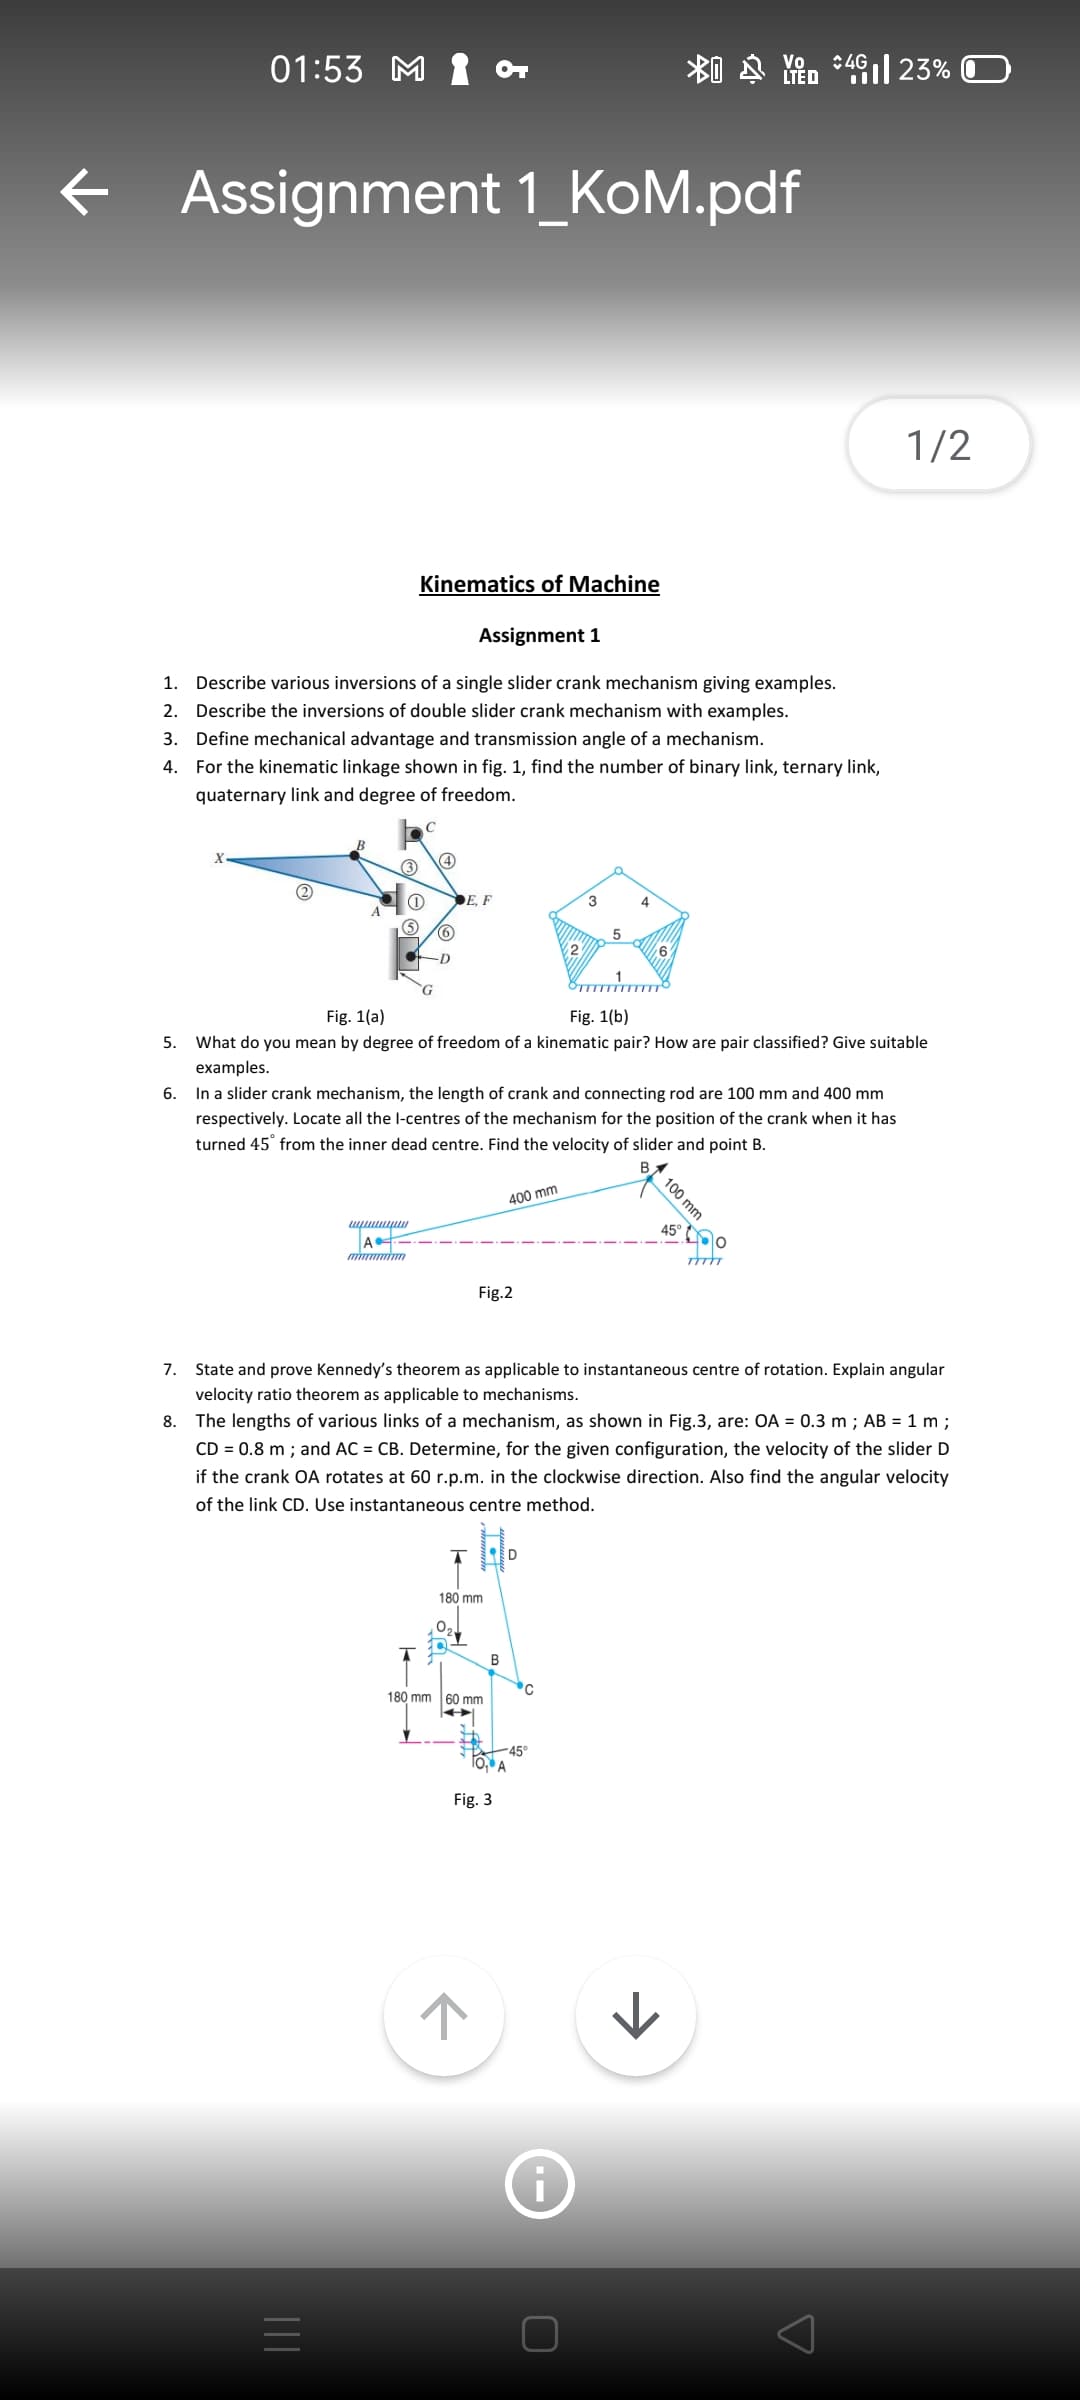 01:53 M 1 or
Vo
LTED
:4G
+ Assignment 1_KoM.pdf
1/2
Kinematics of Machine
Assignment 1
1. Describe various inversions of a single slider crank mechanism giving examples.
2. Describe the inversions of double slider crank mechanism with examples.
3. Define mechanical advantage and transmission angle of a mechanism.
4. For the kinematic linkage shown in fig. 1, find the number of binary link, ternary link,
quaternary link and degree of freedom.
C
(1)
DE, F
Fig. 1(a)
Fig. 1(b)
5.
What do you mean by degree of freedom of a kinematic pair? How are pair classified? Give suitable
examples.
6. In a slider crank mechanism, the length of crank and connecting rod are 100 mm and 400 mm
respectively. Locate all the l-centres of the mechanism for the position of the crank when it has
turned 45° from the inner dead centre. Find the velocity of slider and point B.
400 mm
45°
m mim
Fig.2
7.
State and prove Kennedy's theorem as applicable to instantaneous centre of rotation. Explain angular
velocity ratio theorem as applicable to mechanisms.
8. The lengths of various links of a mechanism, as shown in Fig.3, are: OA = 0.3 m ; AB = 1 m ;
CD = 0.8 m ; and AC = CB. Determine, for the given configuration, the velocity of the slider D
if the crank OA rotates at 60 r.p.m. in the clockwise direction. Also find the angular velocity
of the link CD. Use instantaneous centre method.
180 mm
В
180 mm 60 mm
-45°
To, A
Fig. 3
100 mm
